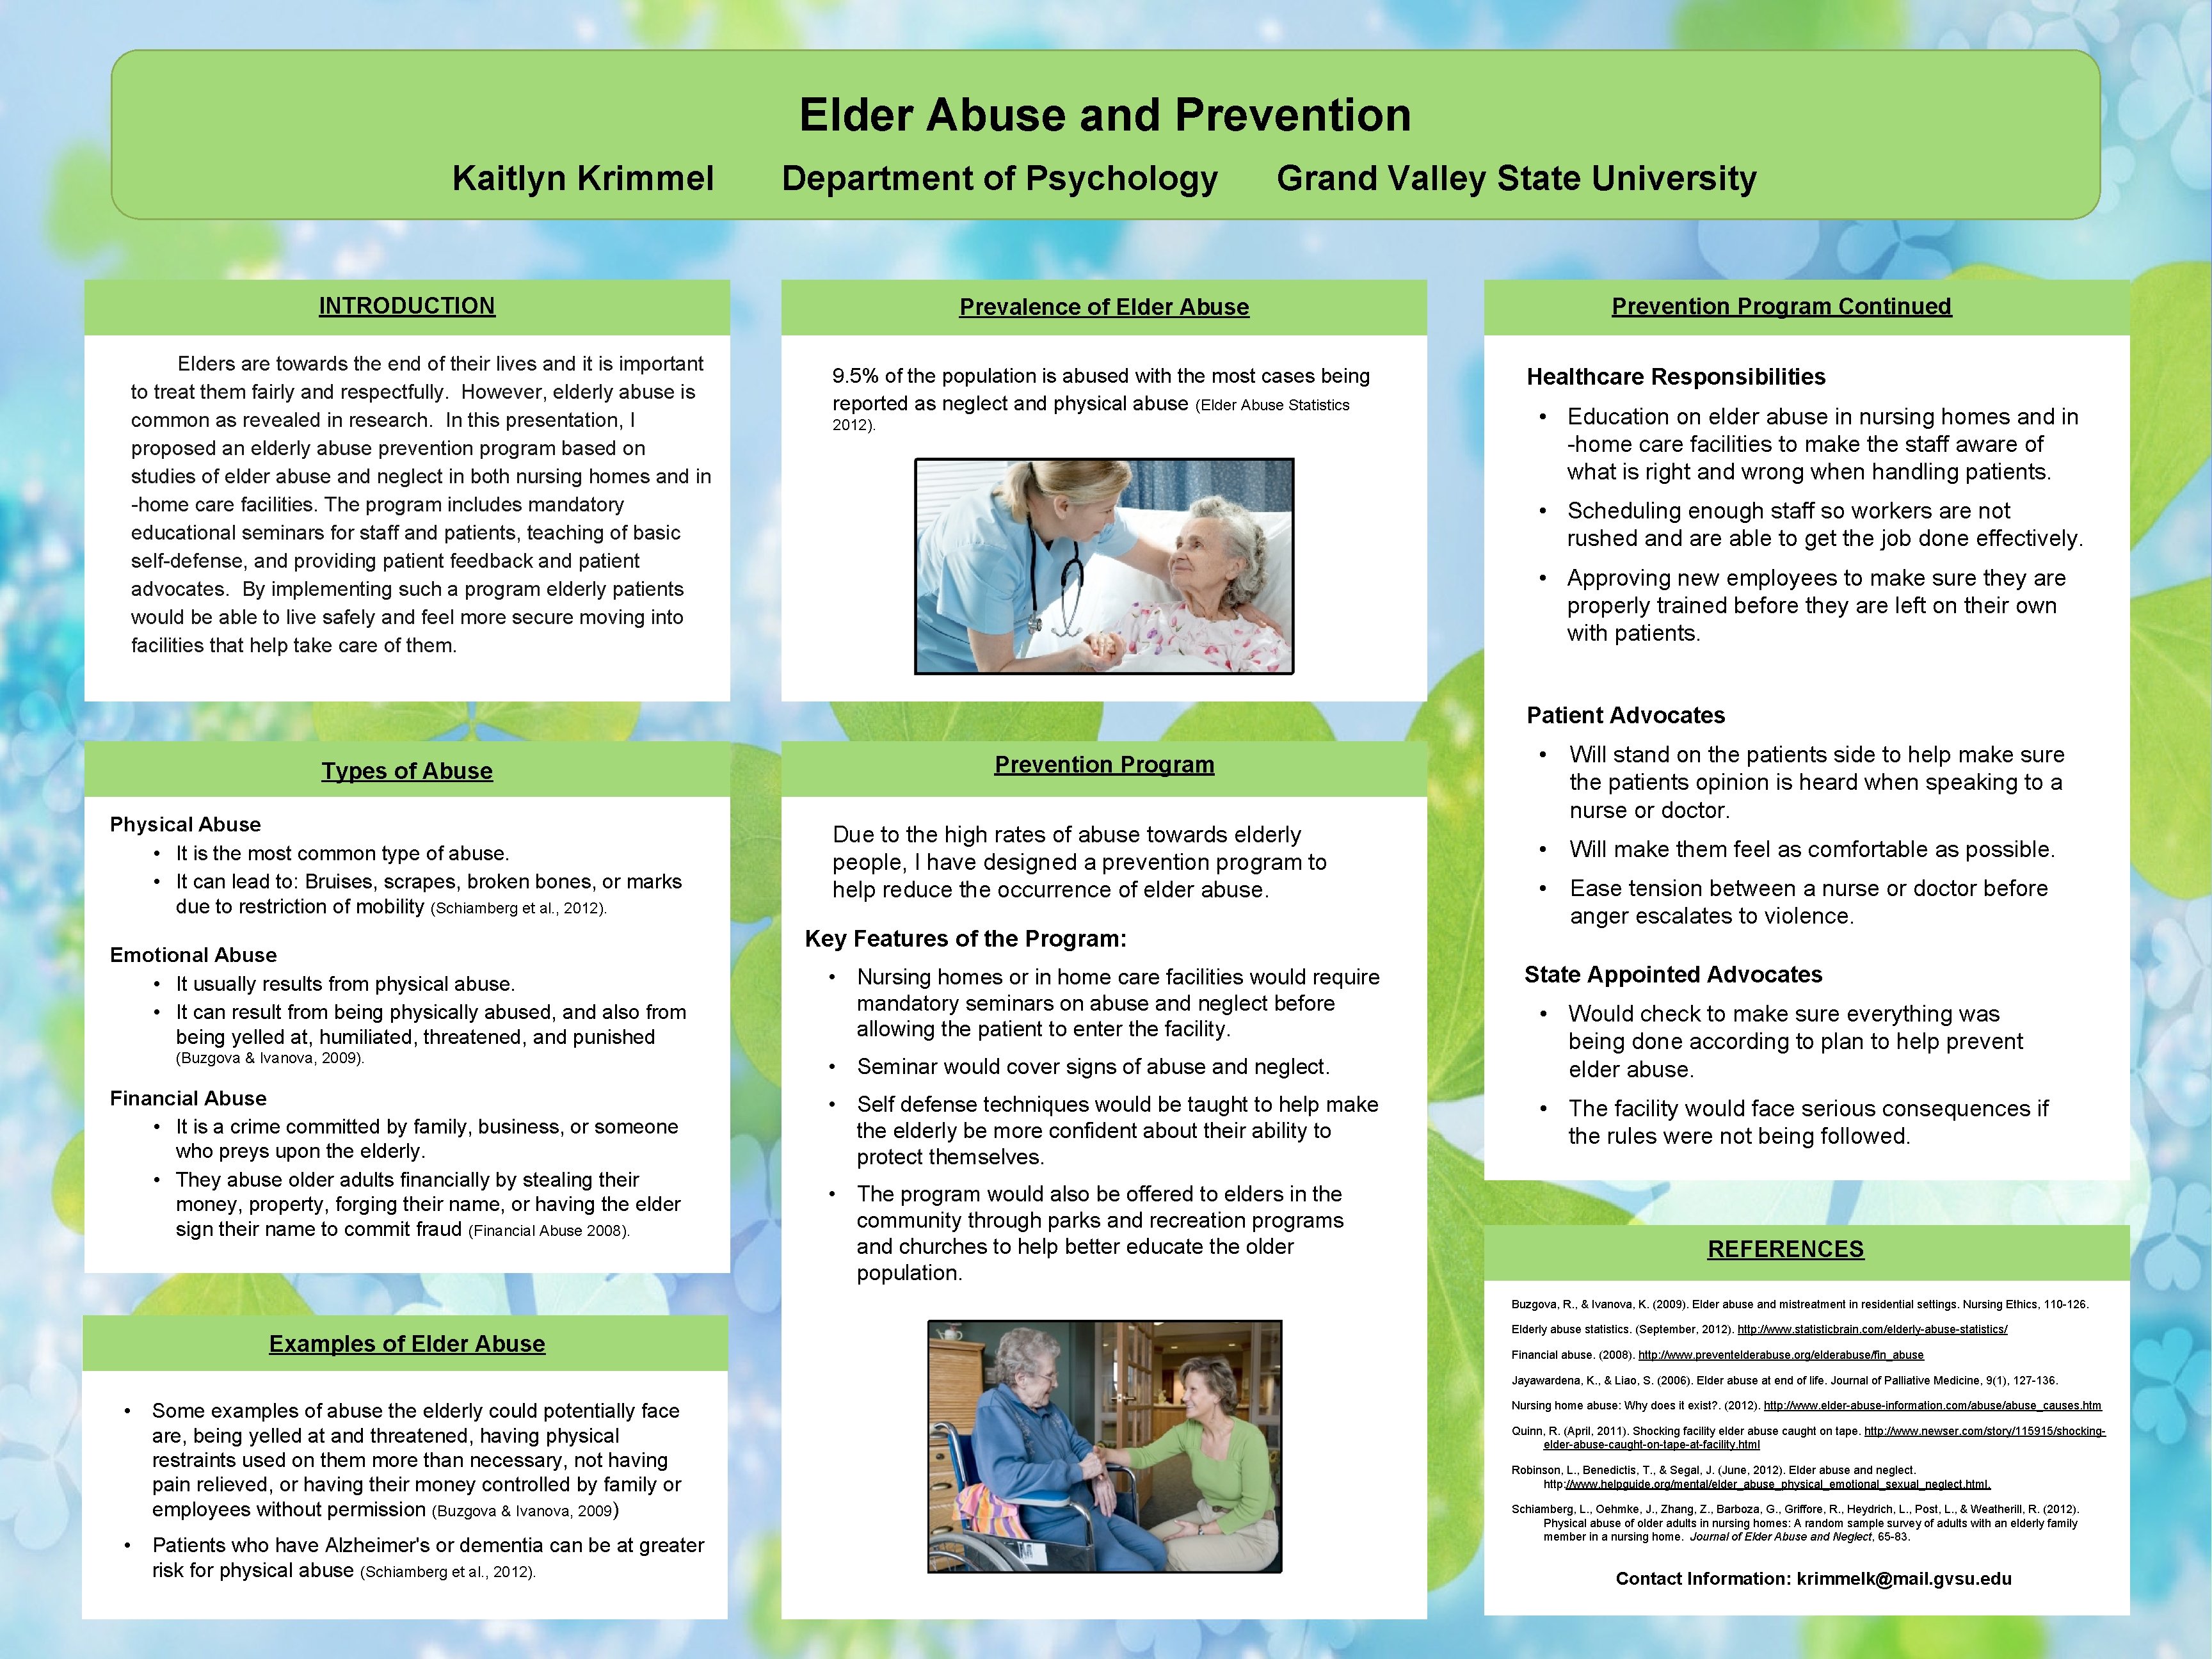 Elder Abuse and Prevention Kaitlyn Krimmel Department of Psychology INTRODUCTION Elders are towards the